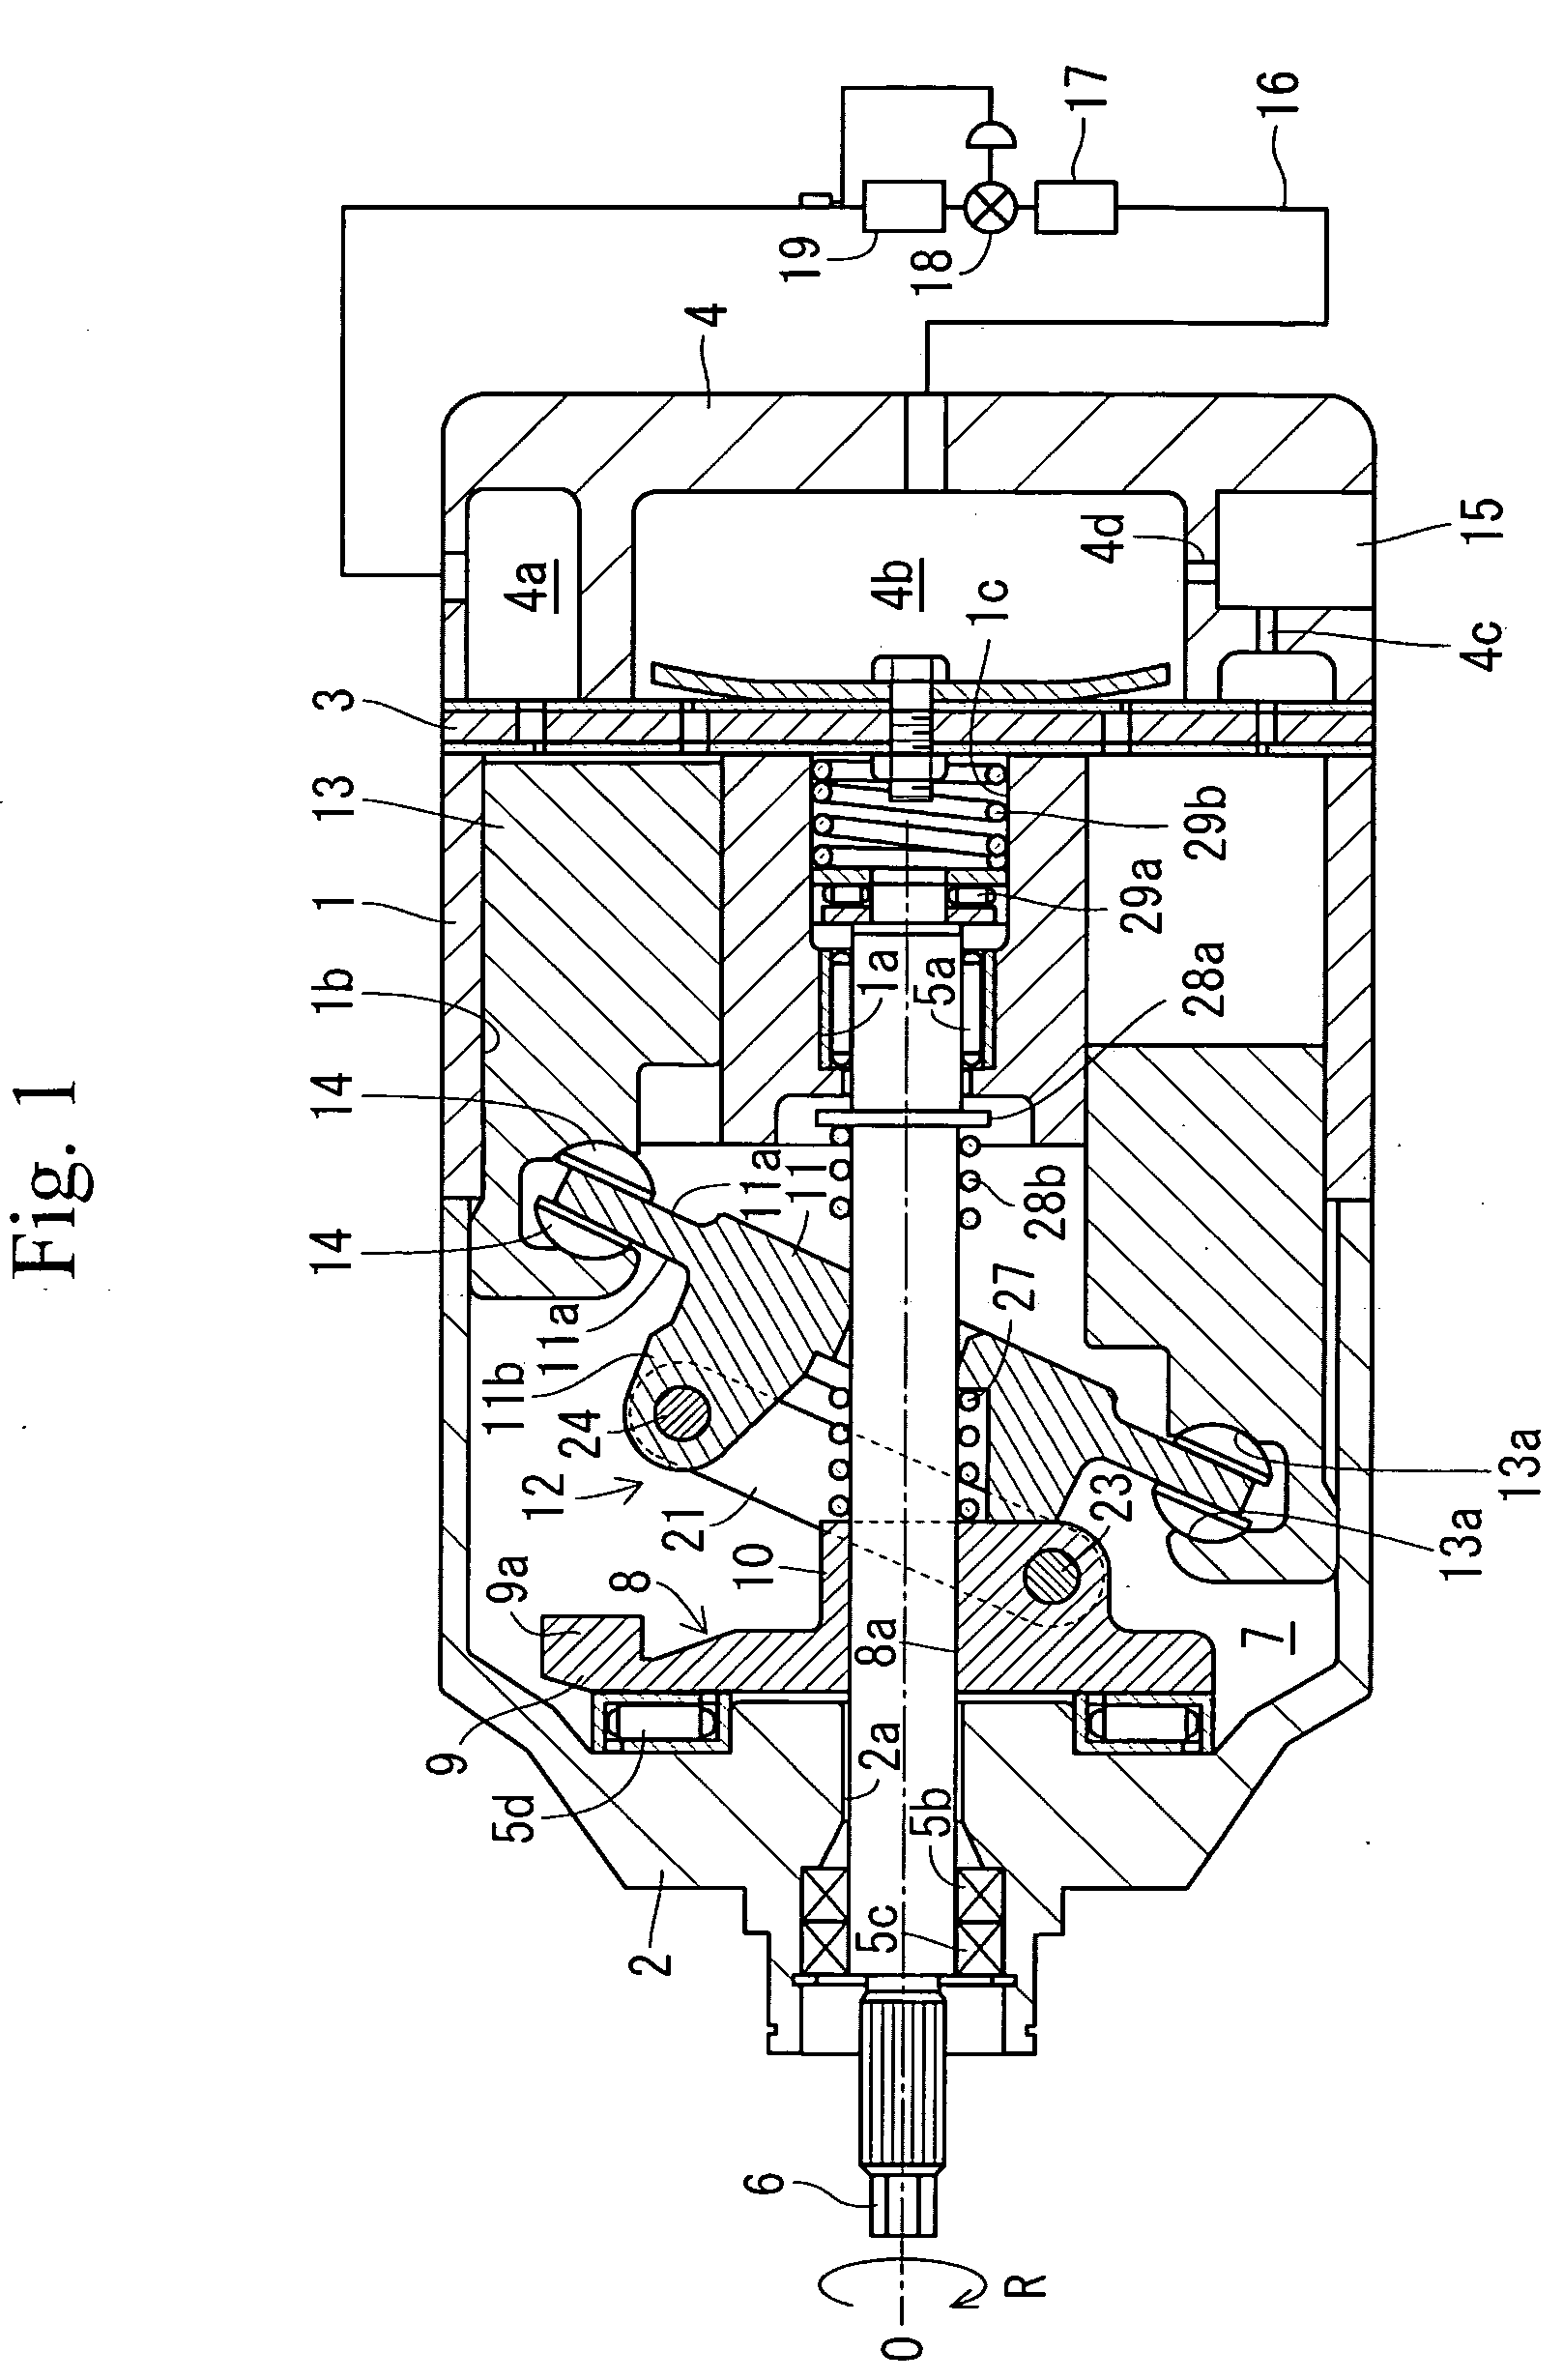 Capacity-variable type swash plate compressor